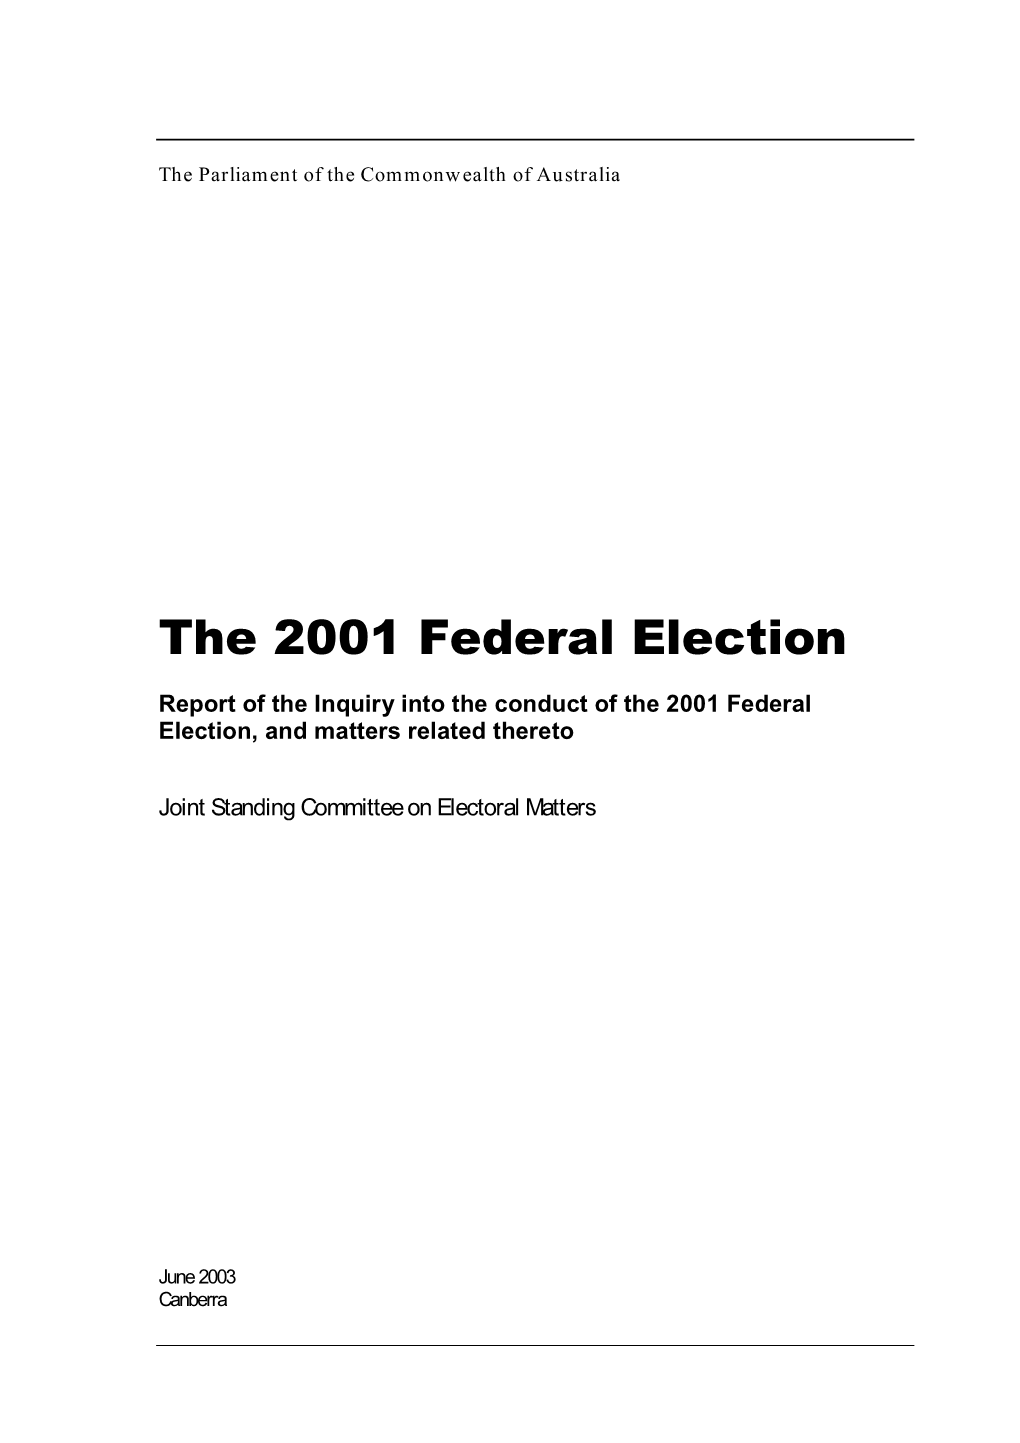 The 2001 Federal Election